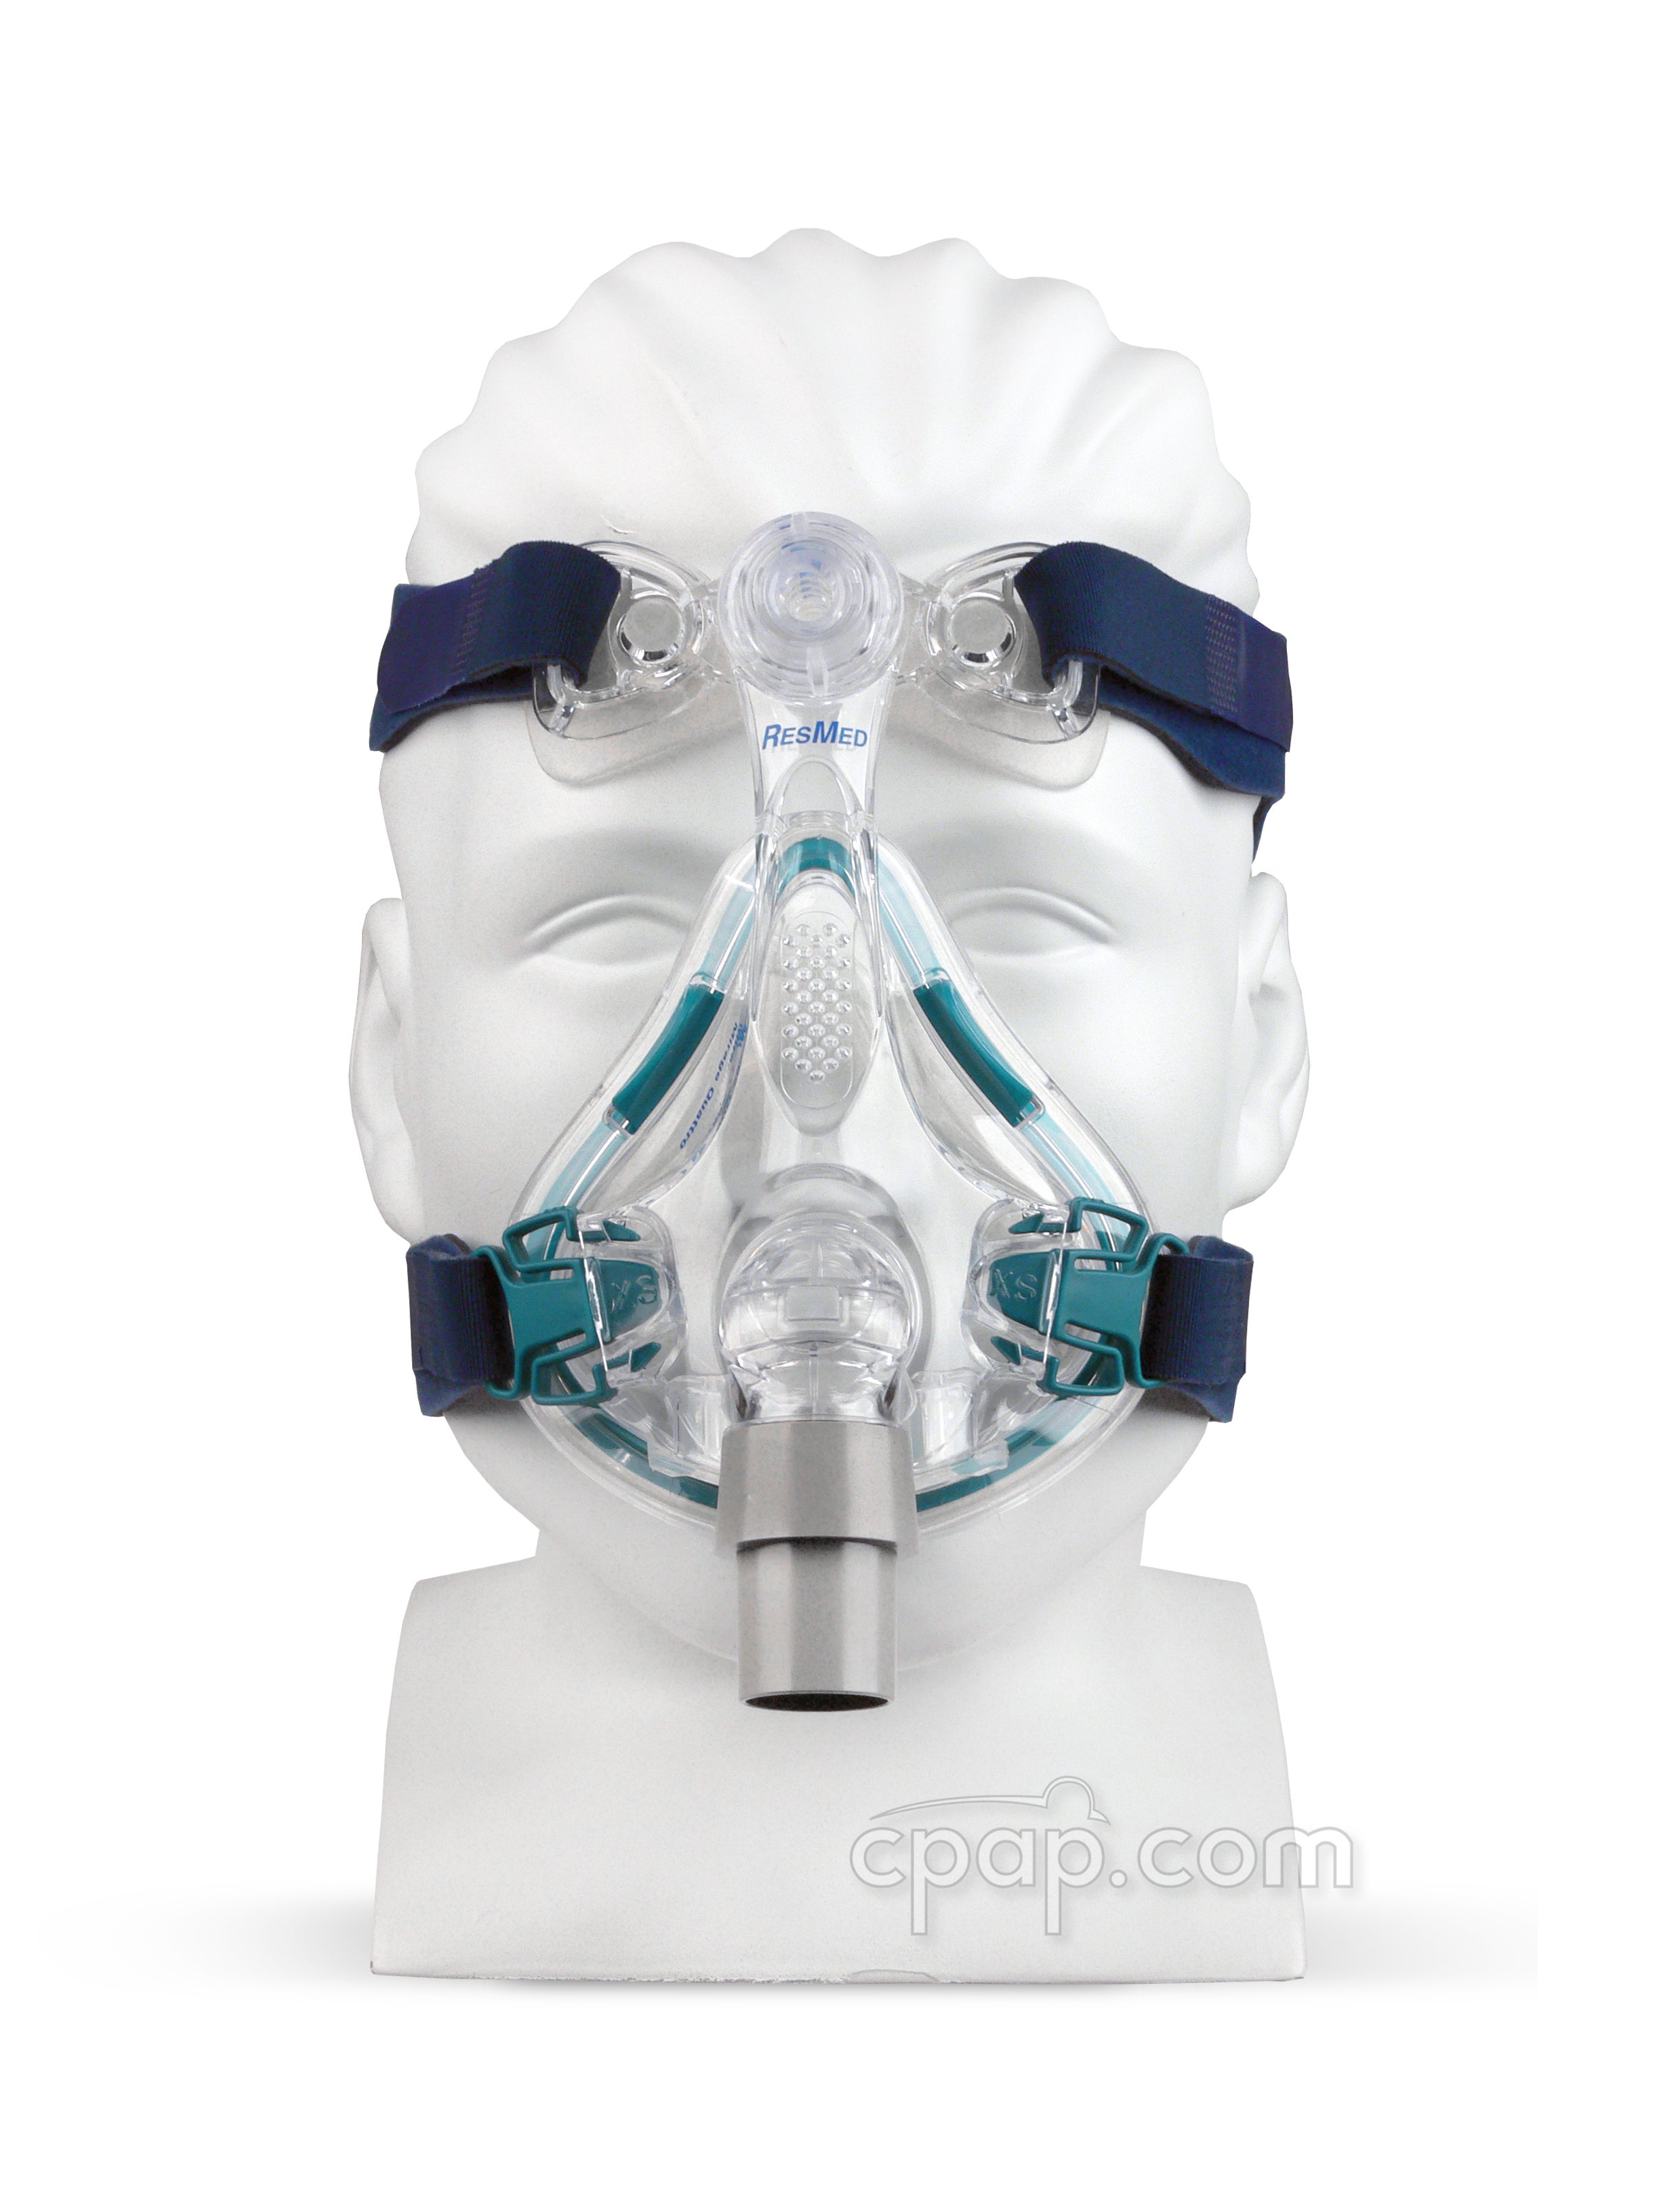 Amara Full Face CPAP Mask With Gel Silicone Cushions | lupon.gov.ph